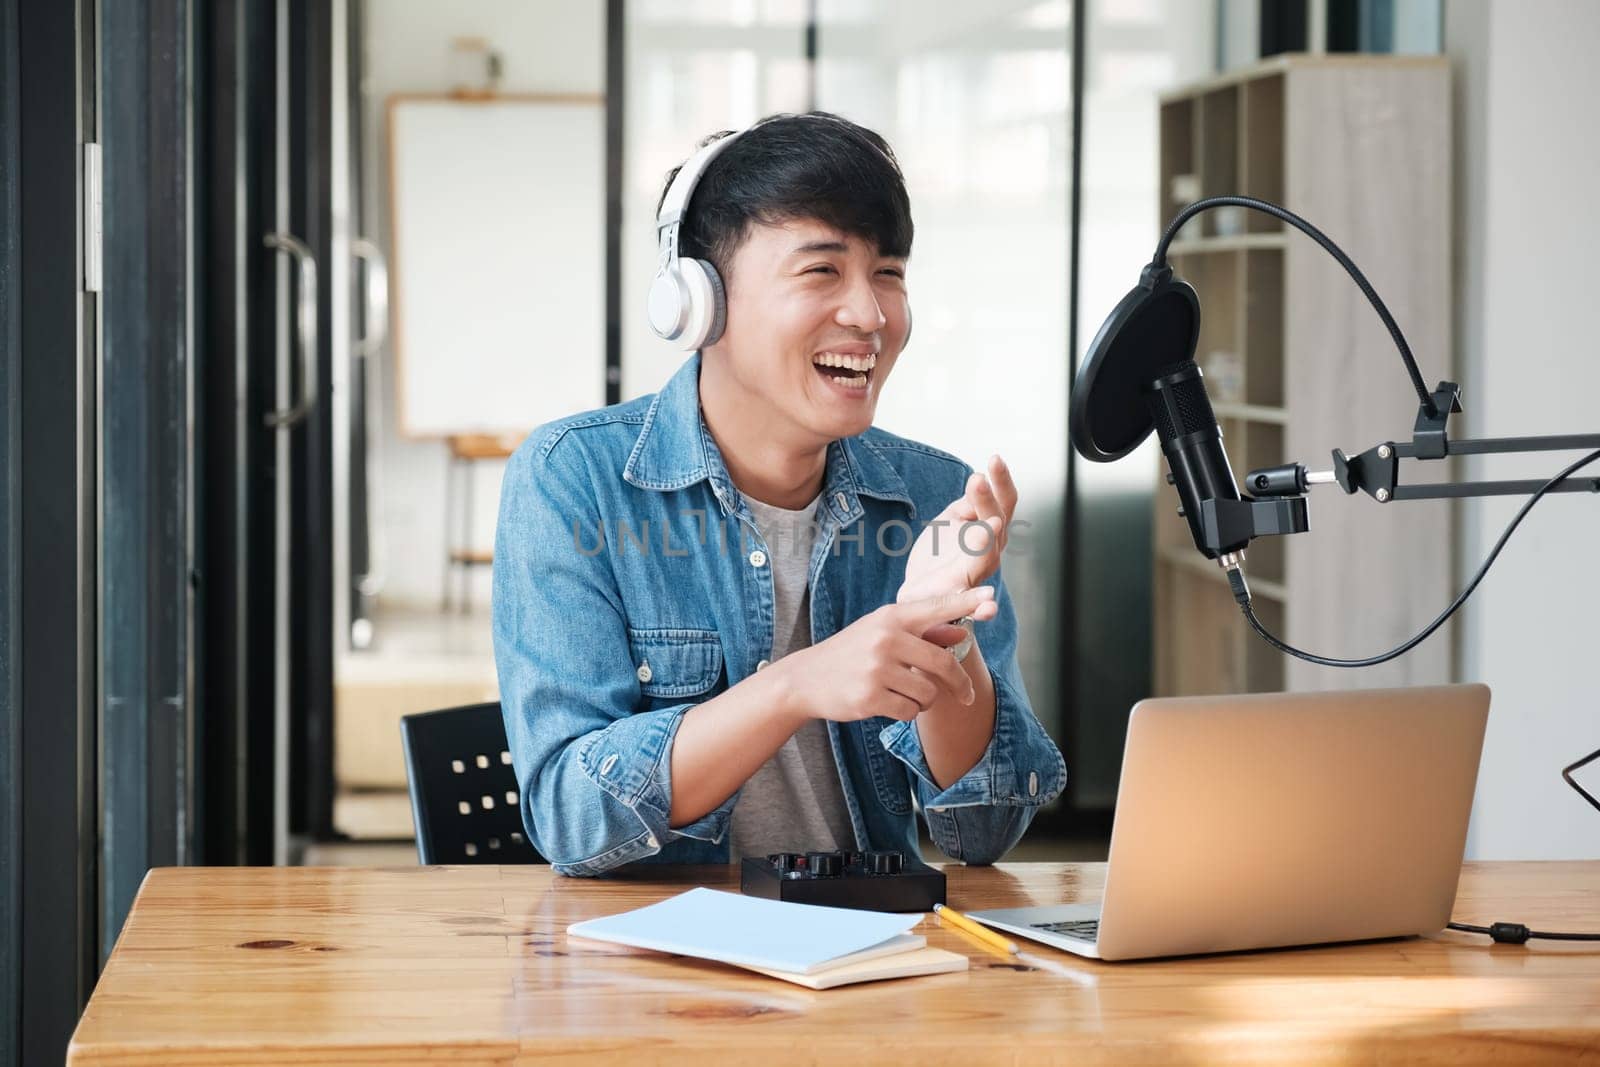 A man wearing headphones is smiling and clapping his hands by ijeab